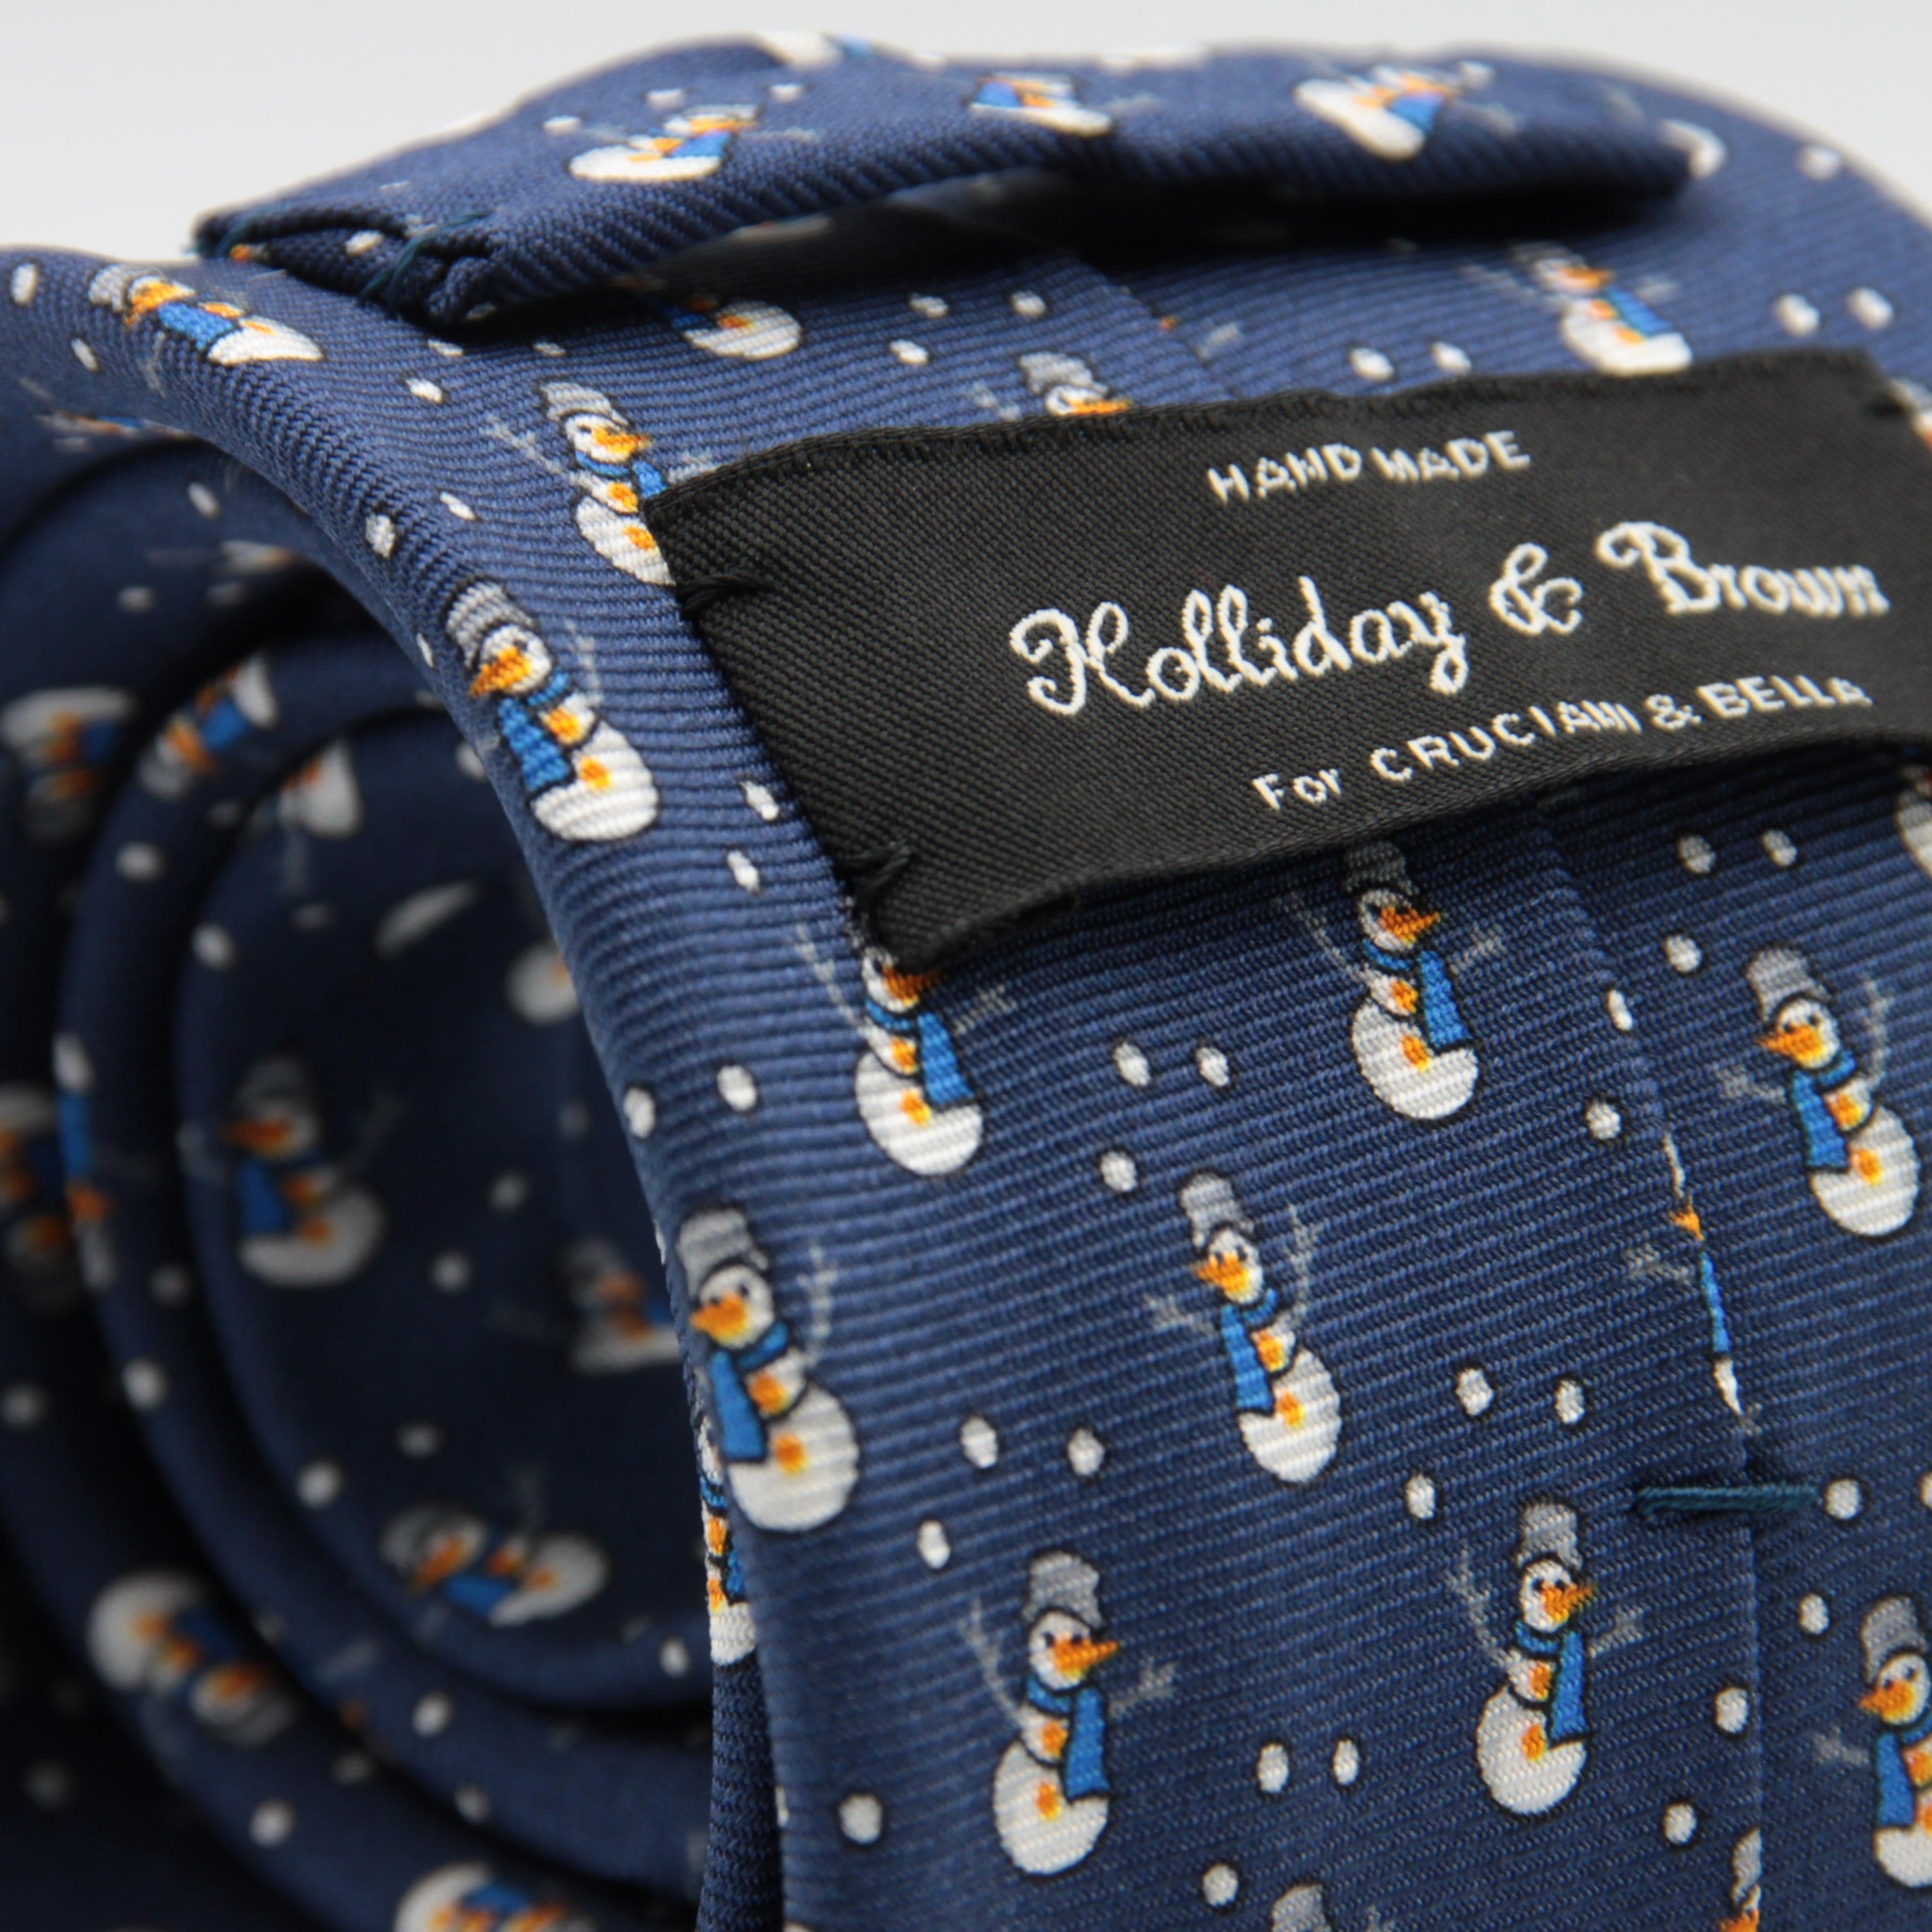 Holliday & Brown for Cruciani & Bella 100% printed Silk Self tipped Blue with Grey Snowman tie Handmade in Italy 8 cm x 150 cm #1533